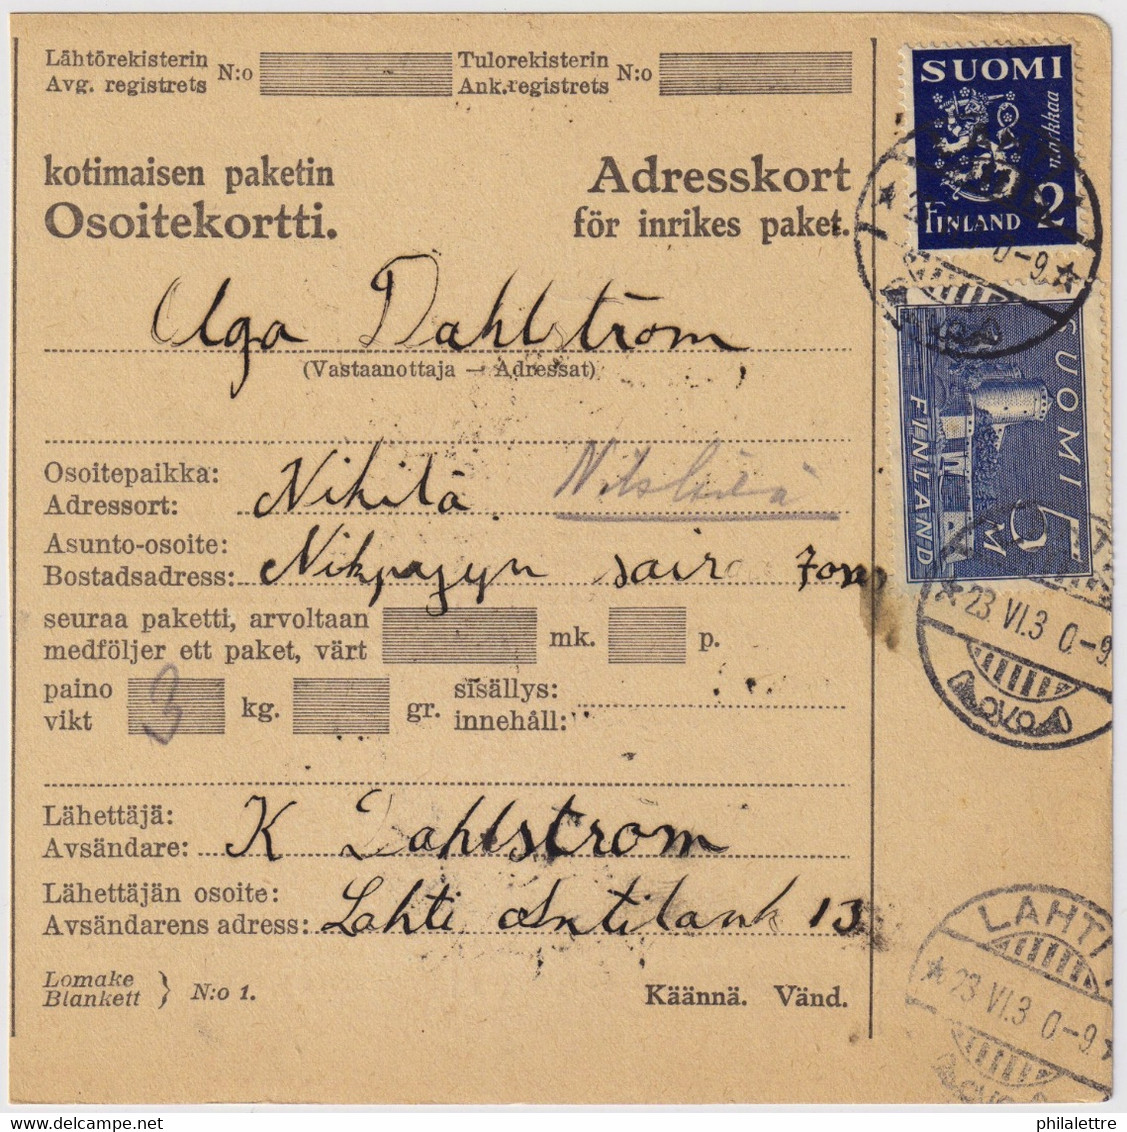 FINLANDE / SUOMI FINLAND 1930 LAHTI To NICKBY - Osoitekortti / Packet Post Address Card - Lettres & Documents